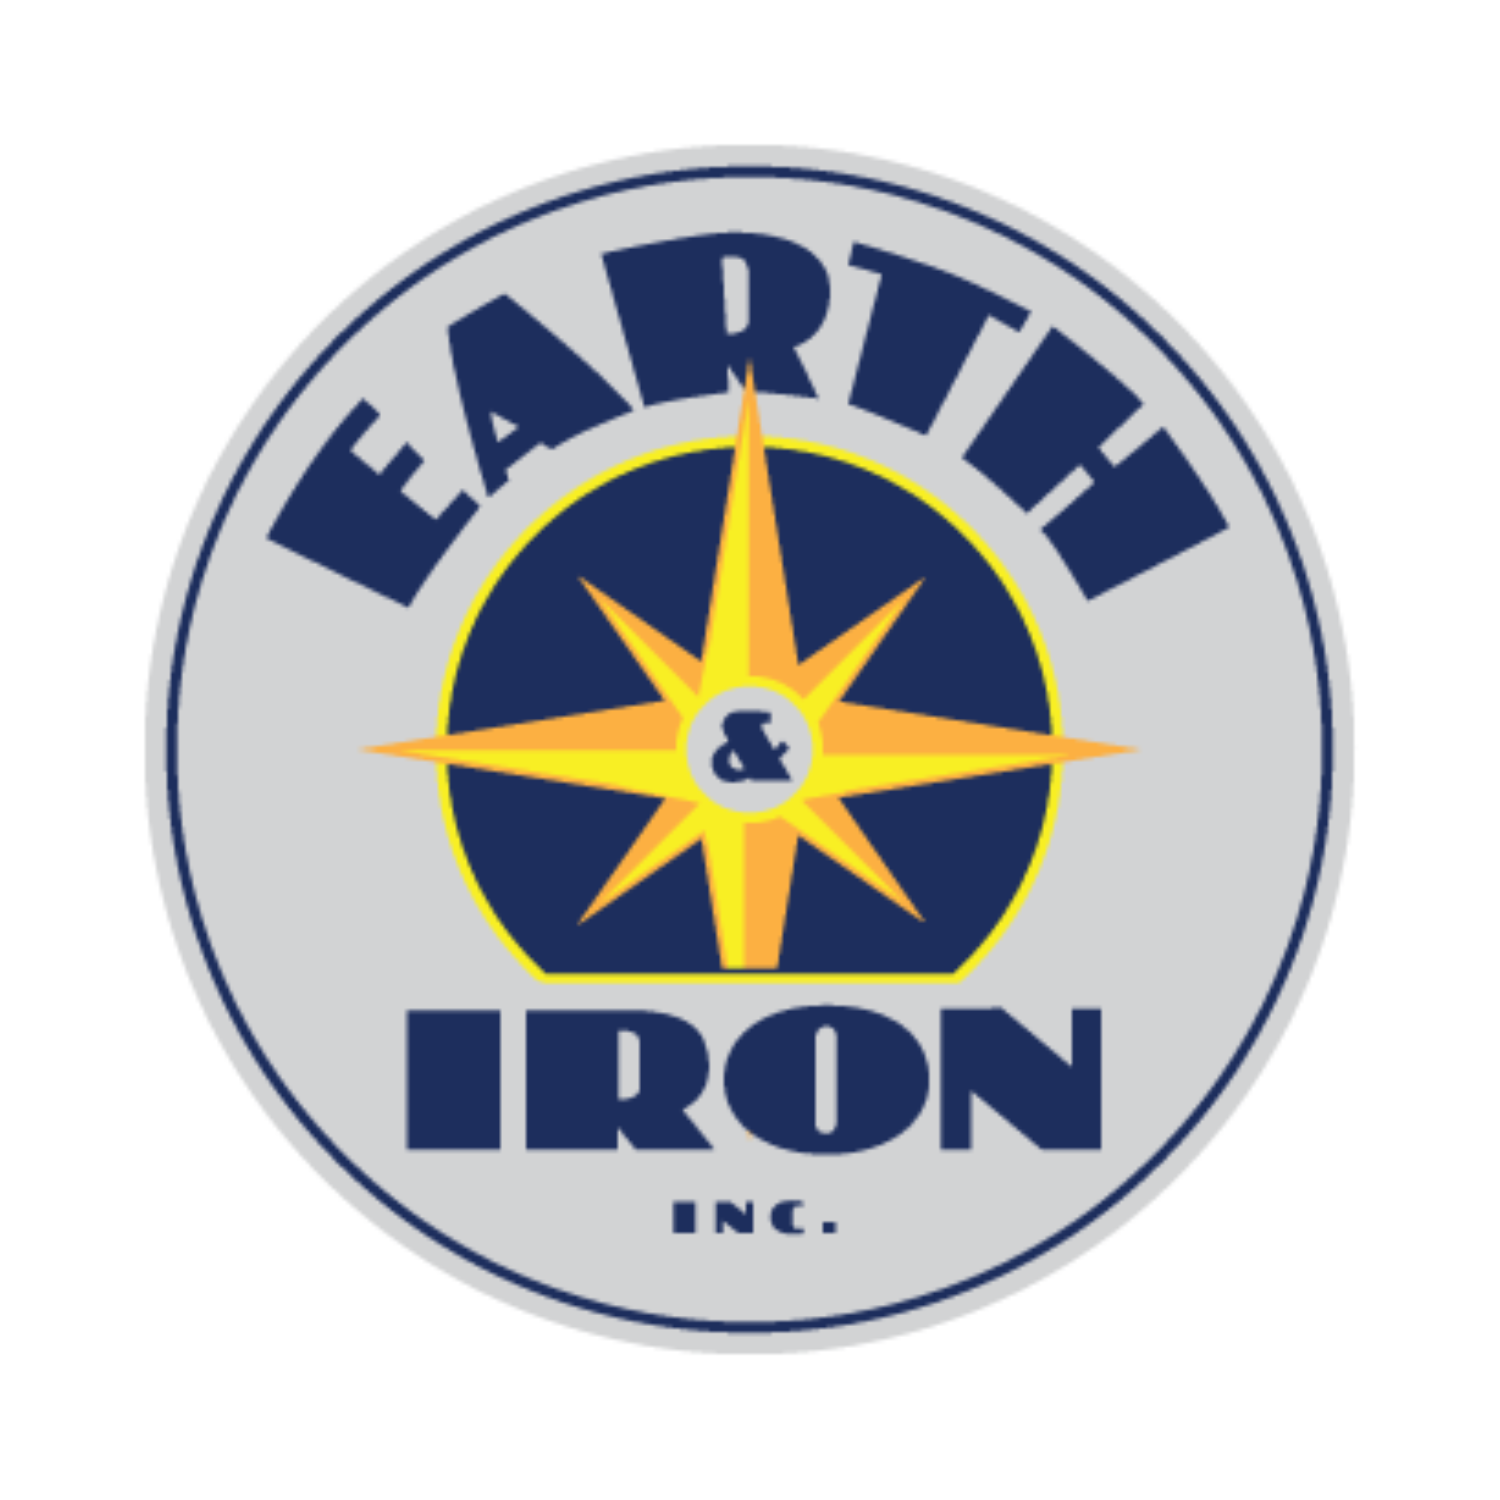 EARTH & IRON  FOR WEBSITE.png